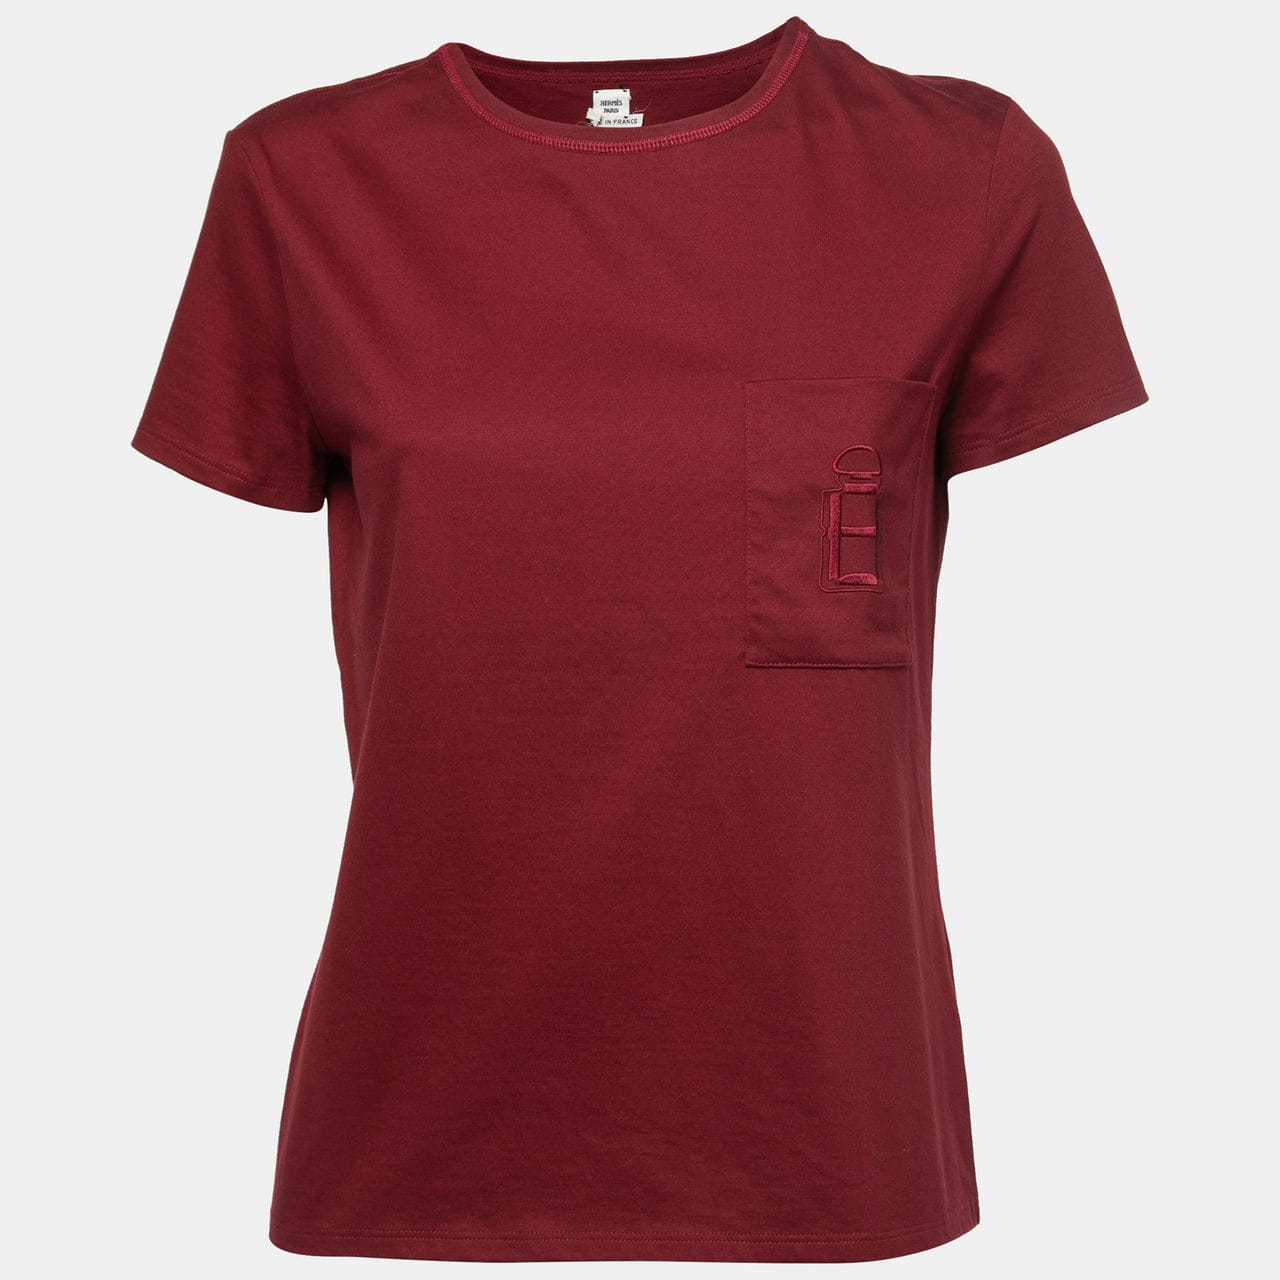 cotton tees for women